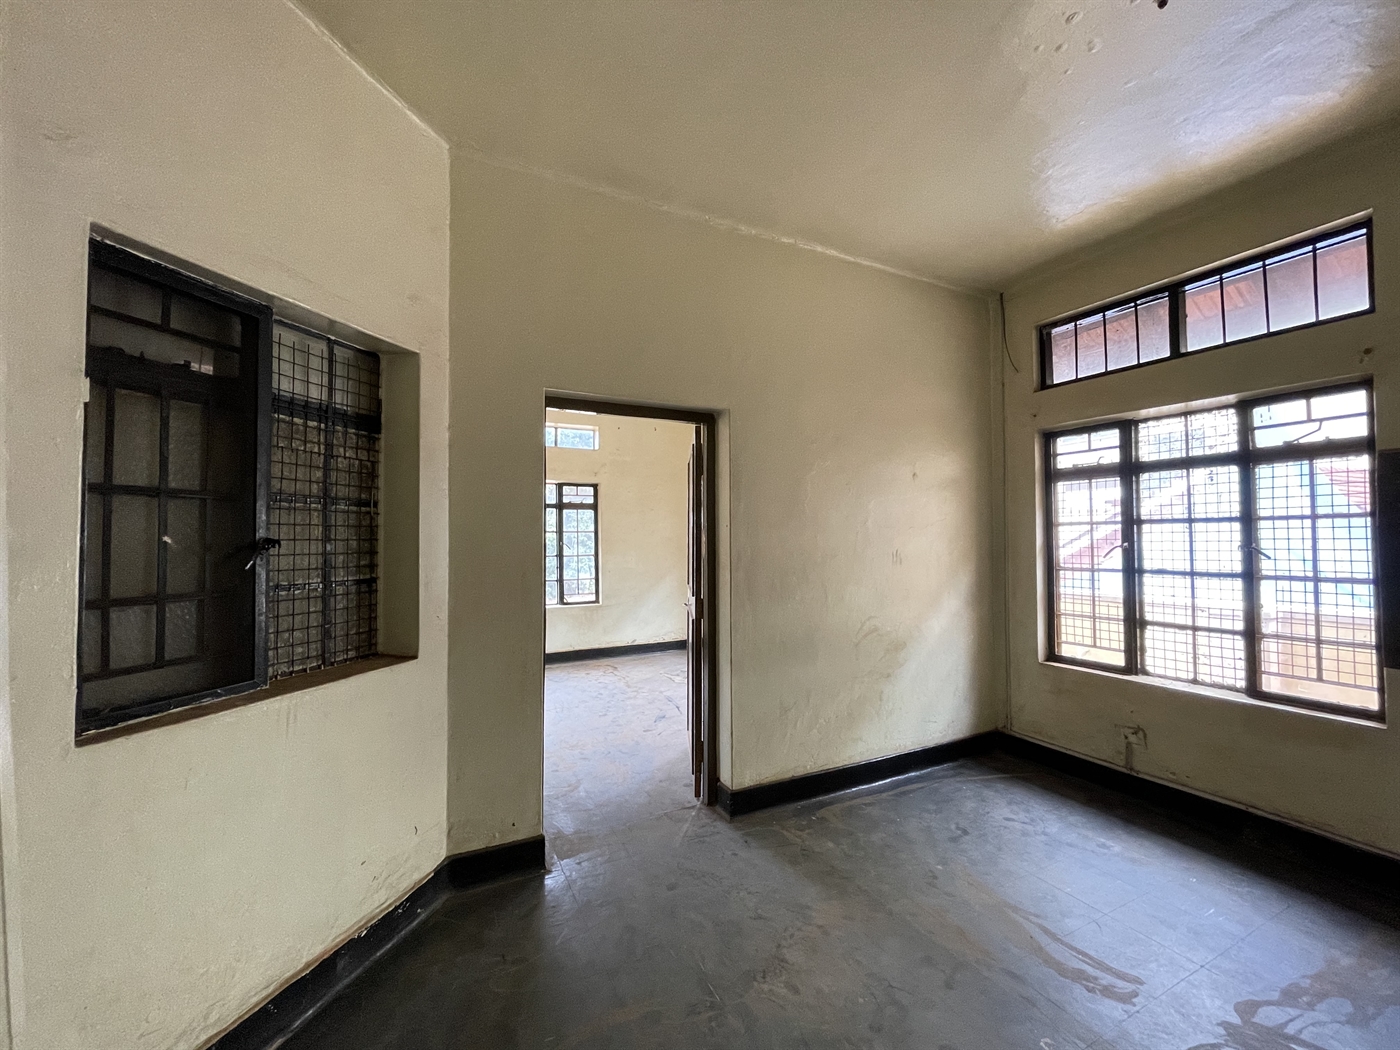 Office Space for rent in Kisementi Kampala